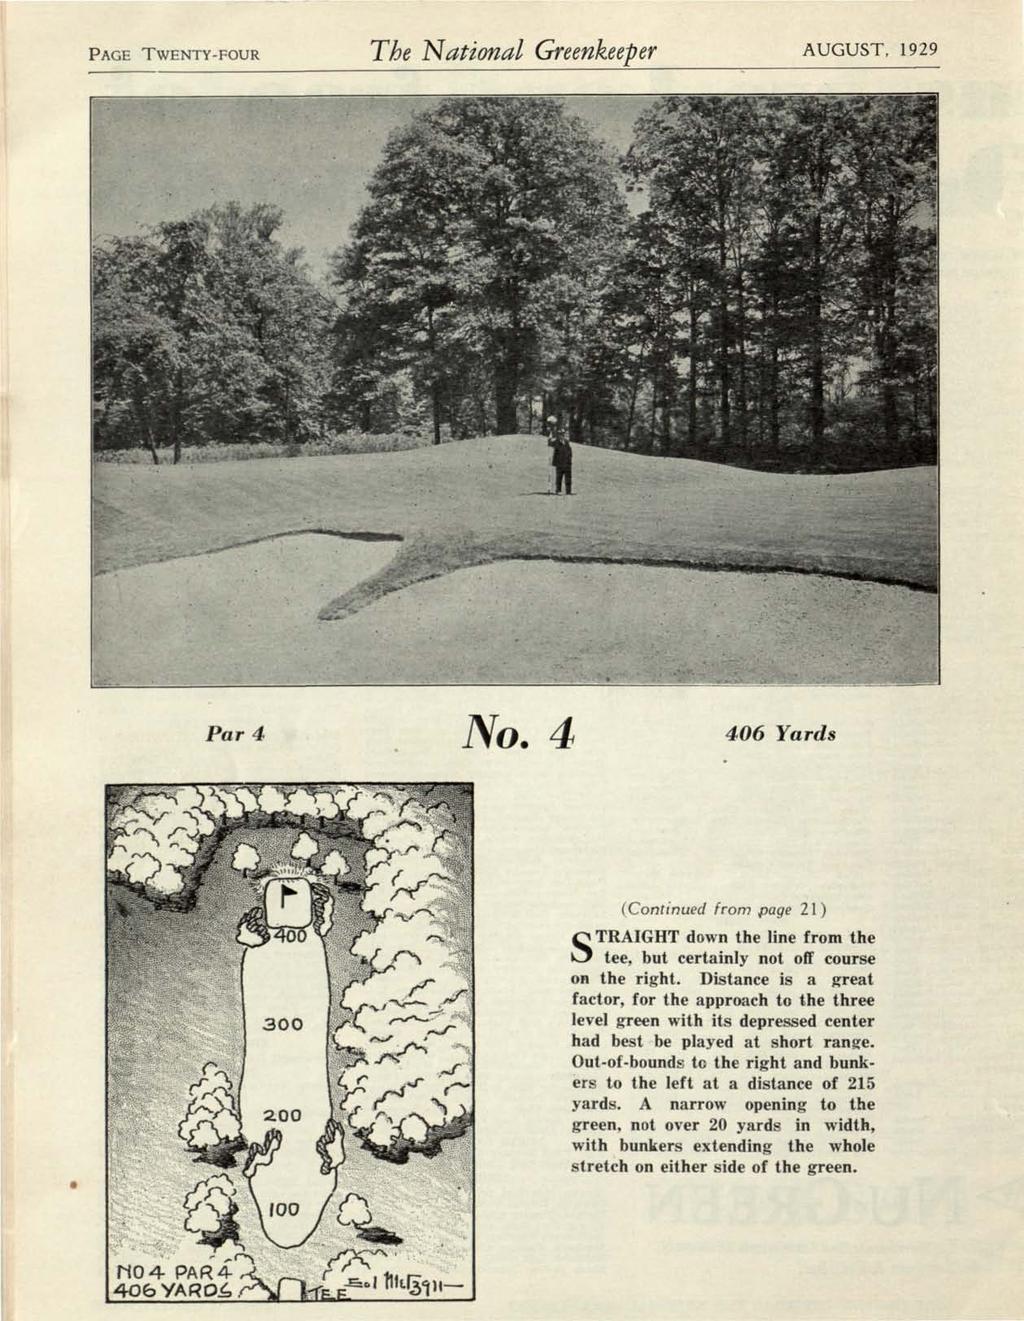 PAGE TWENTY-FOUR The National Greenkeeper AUGUST, 1929 Par 4 No. 4 406 Yards (Continued from page 21) TRAIGHT down the line from the S tee, but certainly not off course on the right.